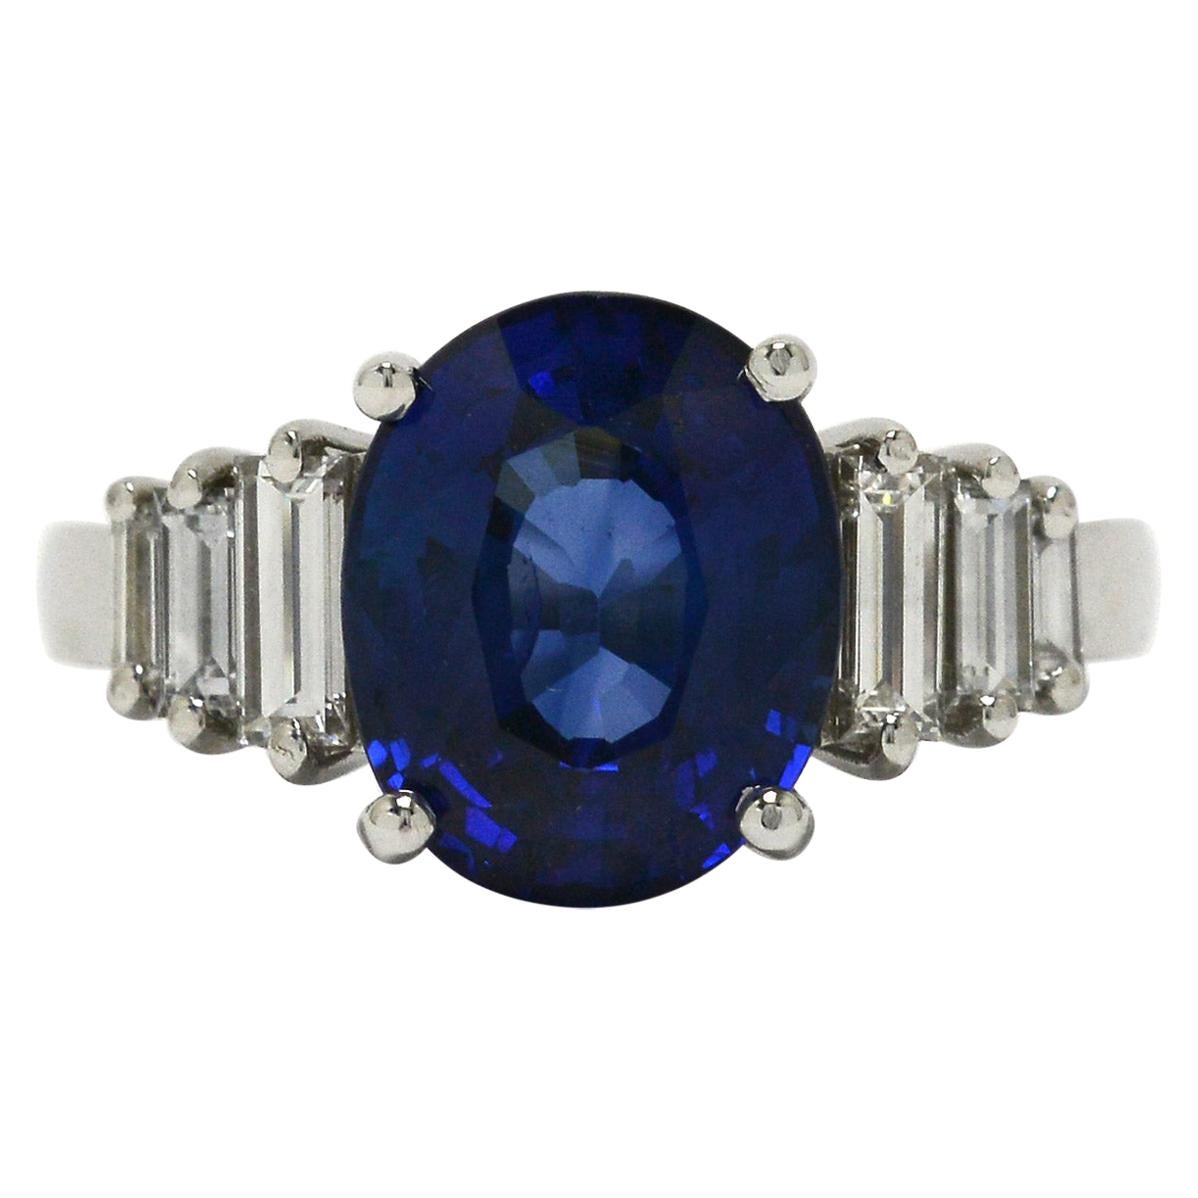 GIA Certified 4.39 Carat Sapphire Engagement Ring